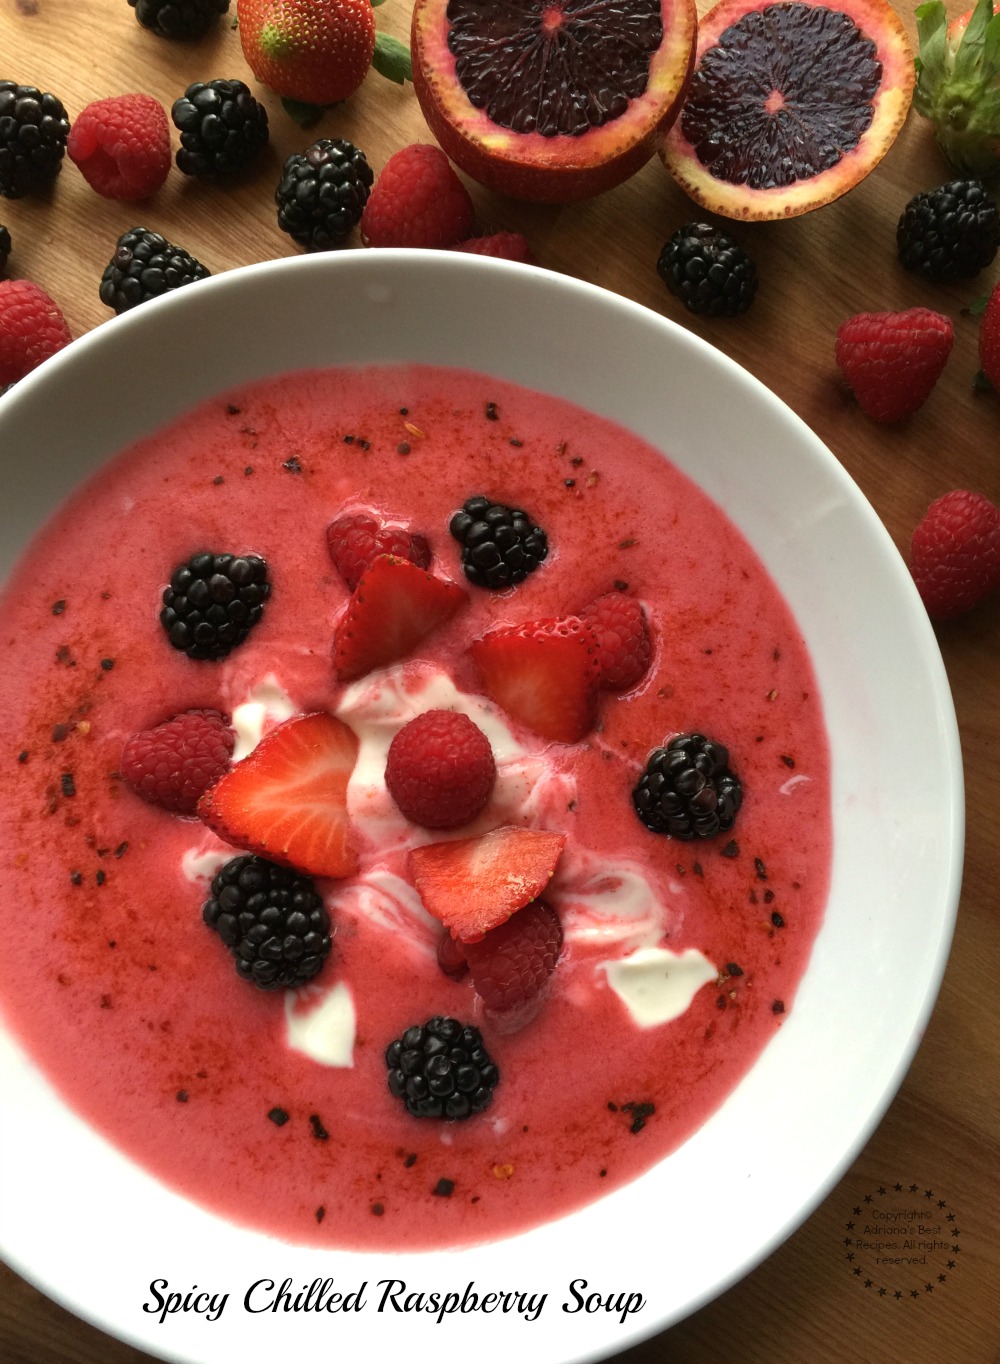 A well balanced spicy chilled raspberry soup